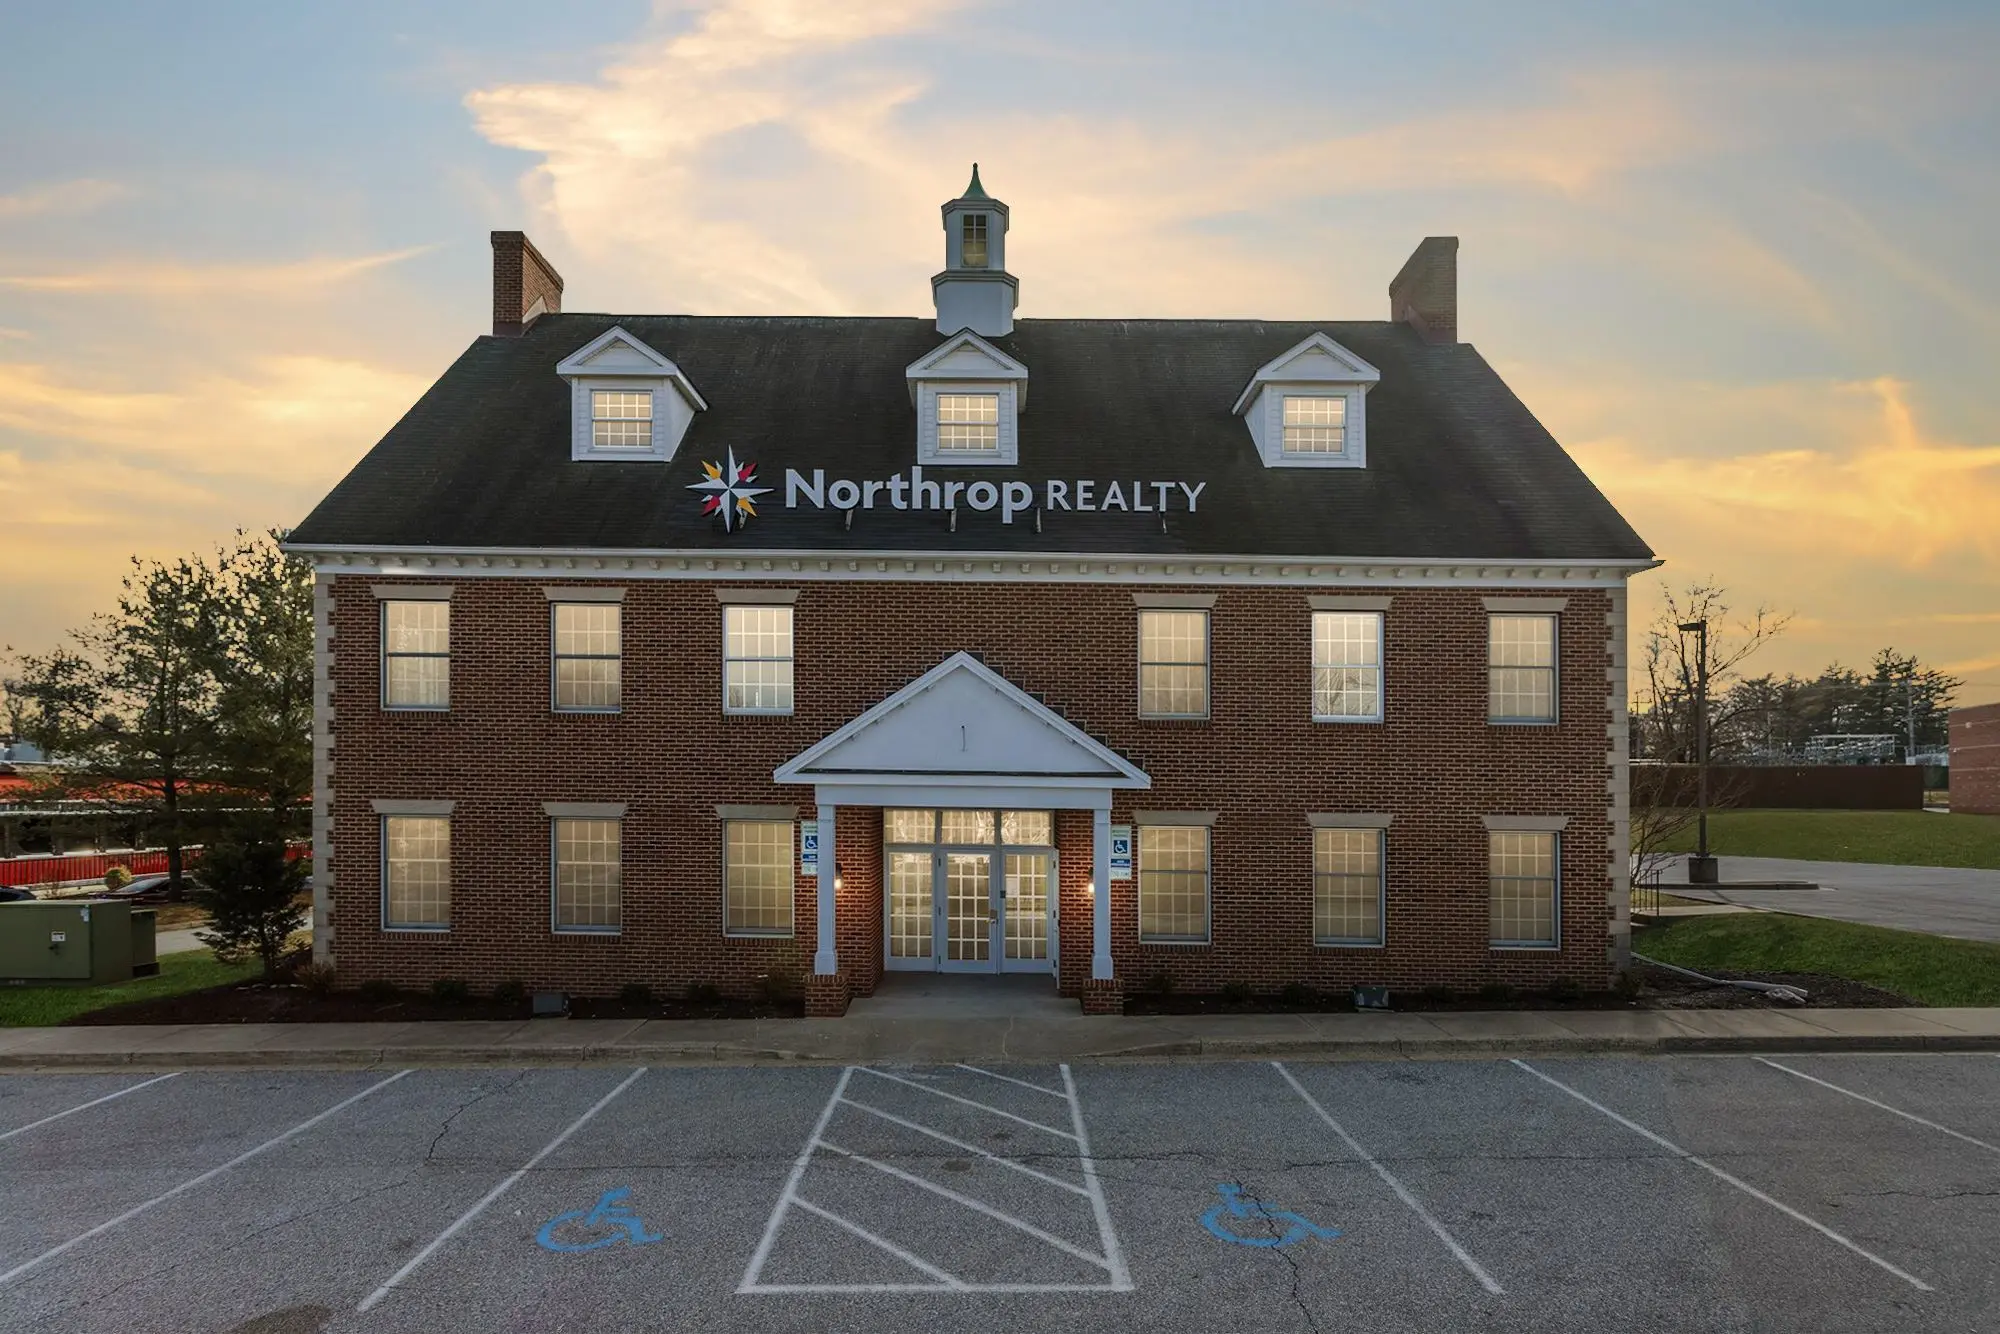 Northrop Realty continues to expand, opens office in Ellicott City